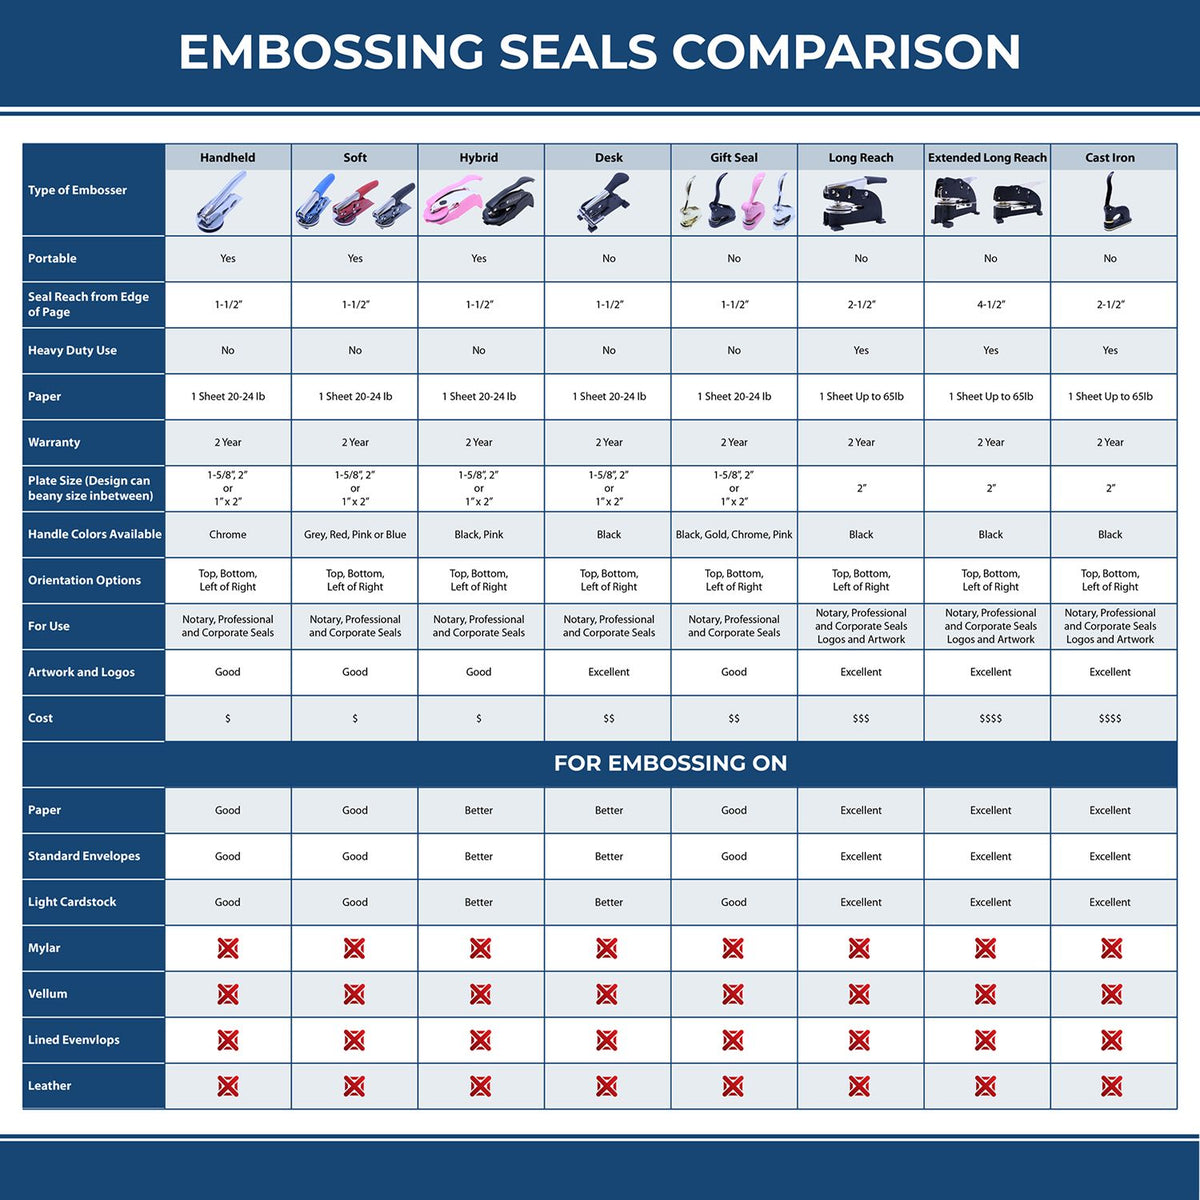 A comparison chart for the different types of mount models available for the Hybrid Florida Land Surveyor Seal